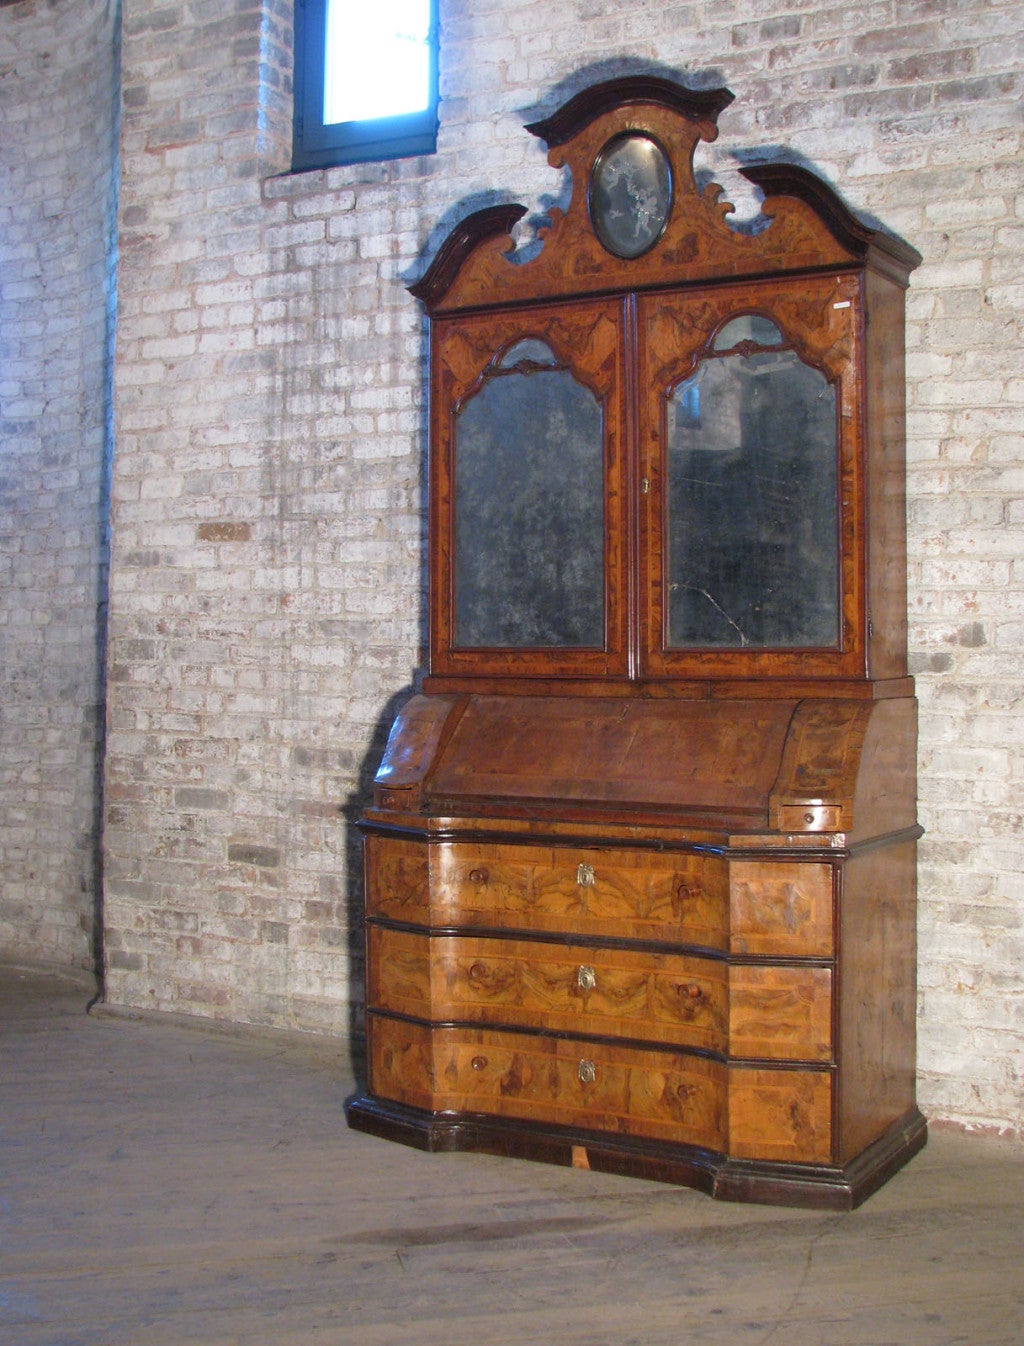 Italian secretary with beautiful, thick walnut radica veneer, wonderful color, ebonized moldings, most likely retaining the original mirror plates. The two upper doors open to reveal a fitted interior, the lower part has a fitted desk compartment